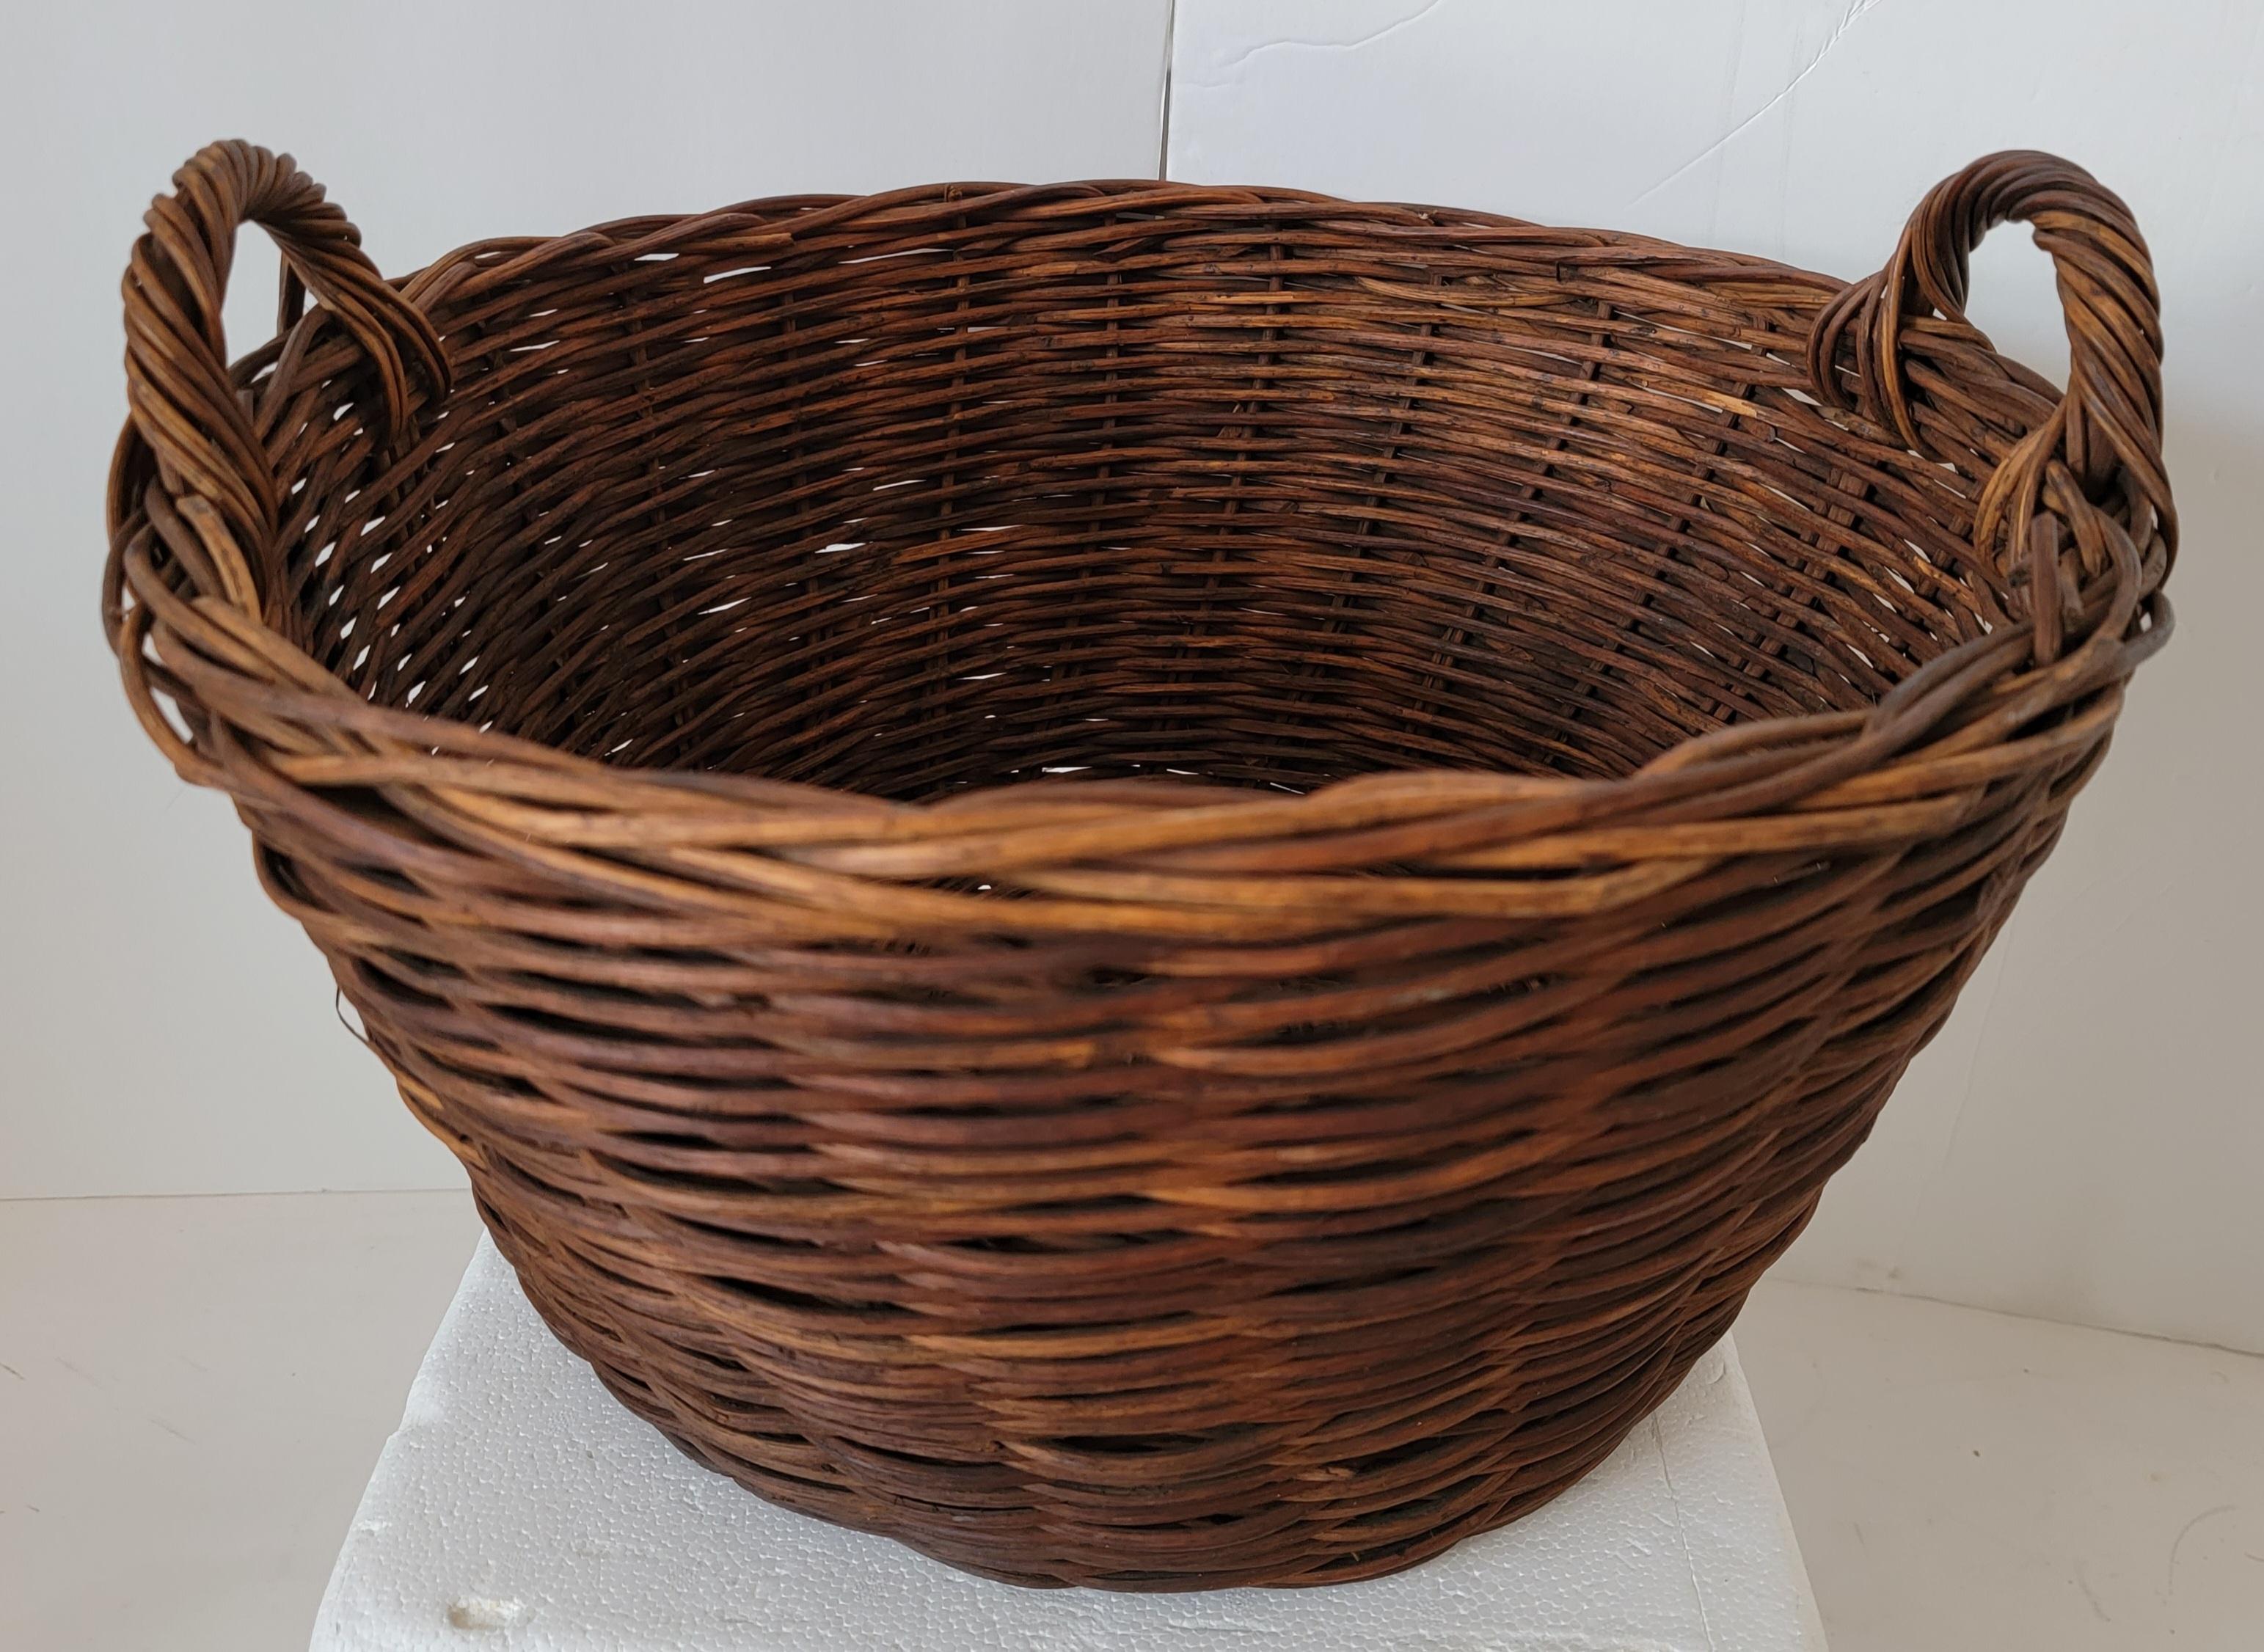 19th C Rag balls and 19th c basket with handles. From the Hess Estate Lancaster County, Pennsylvania.